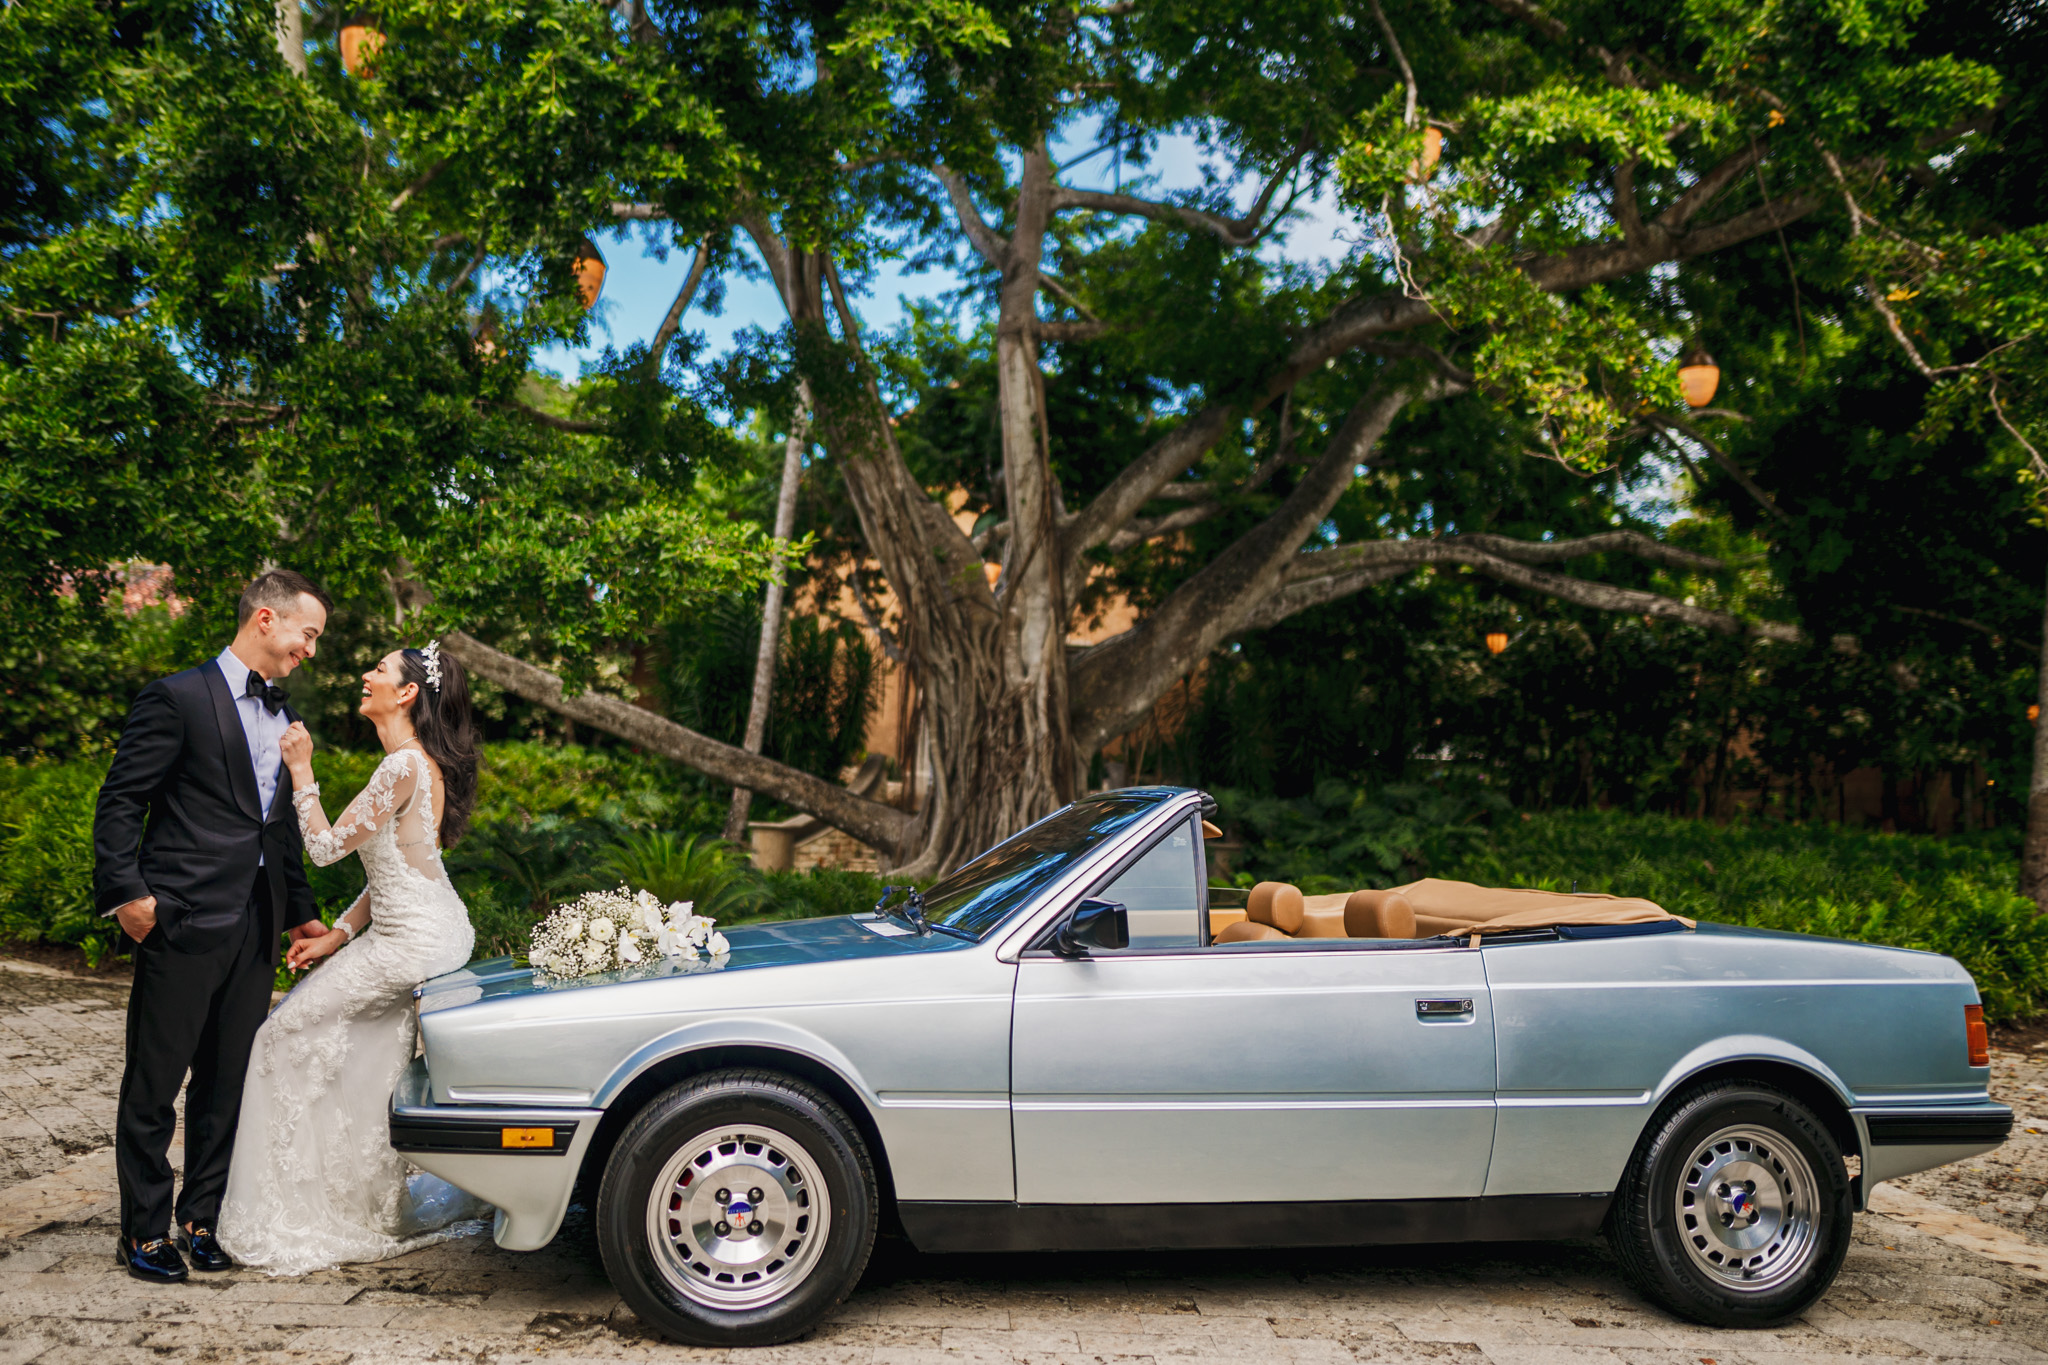 A luxury wedding at Dorado Beach Ritz Carlton Reserve, with a bride and groom standing next to a silver car on the beach.